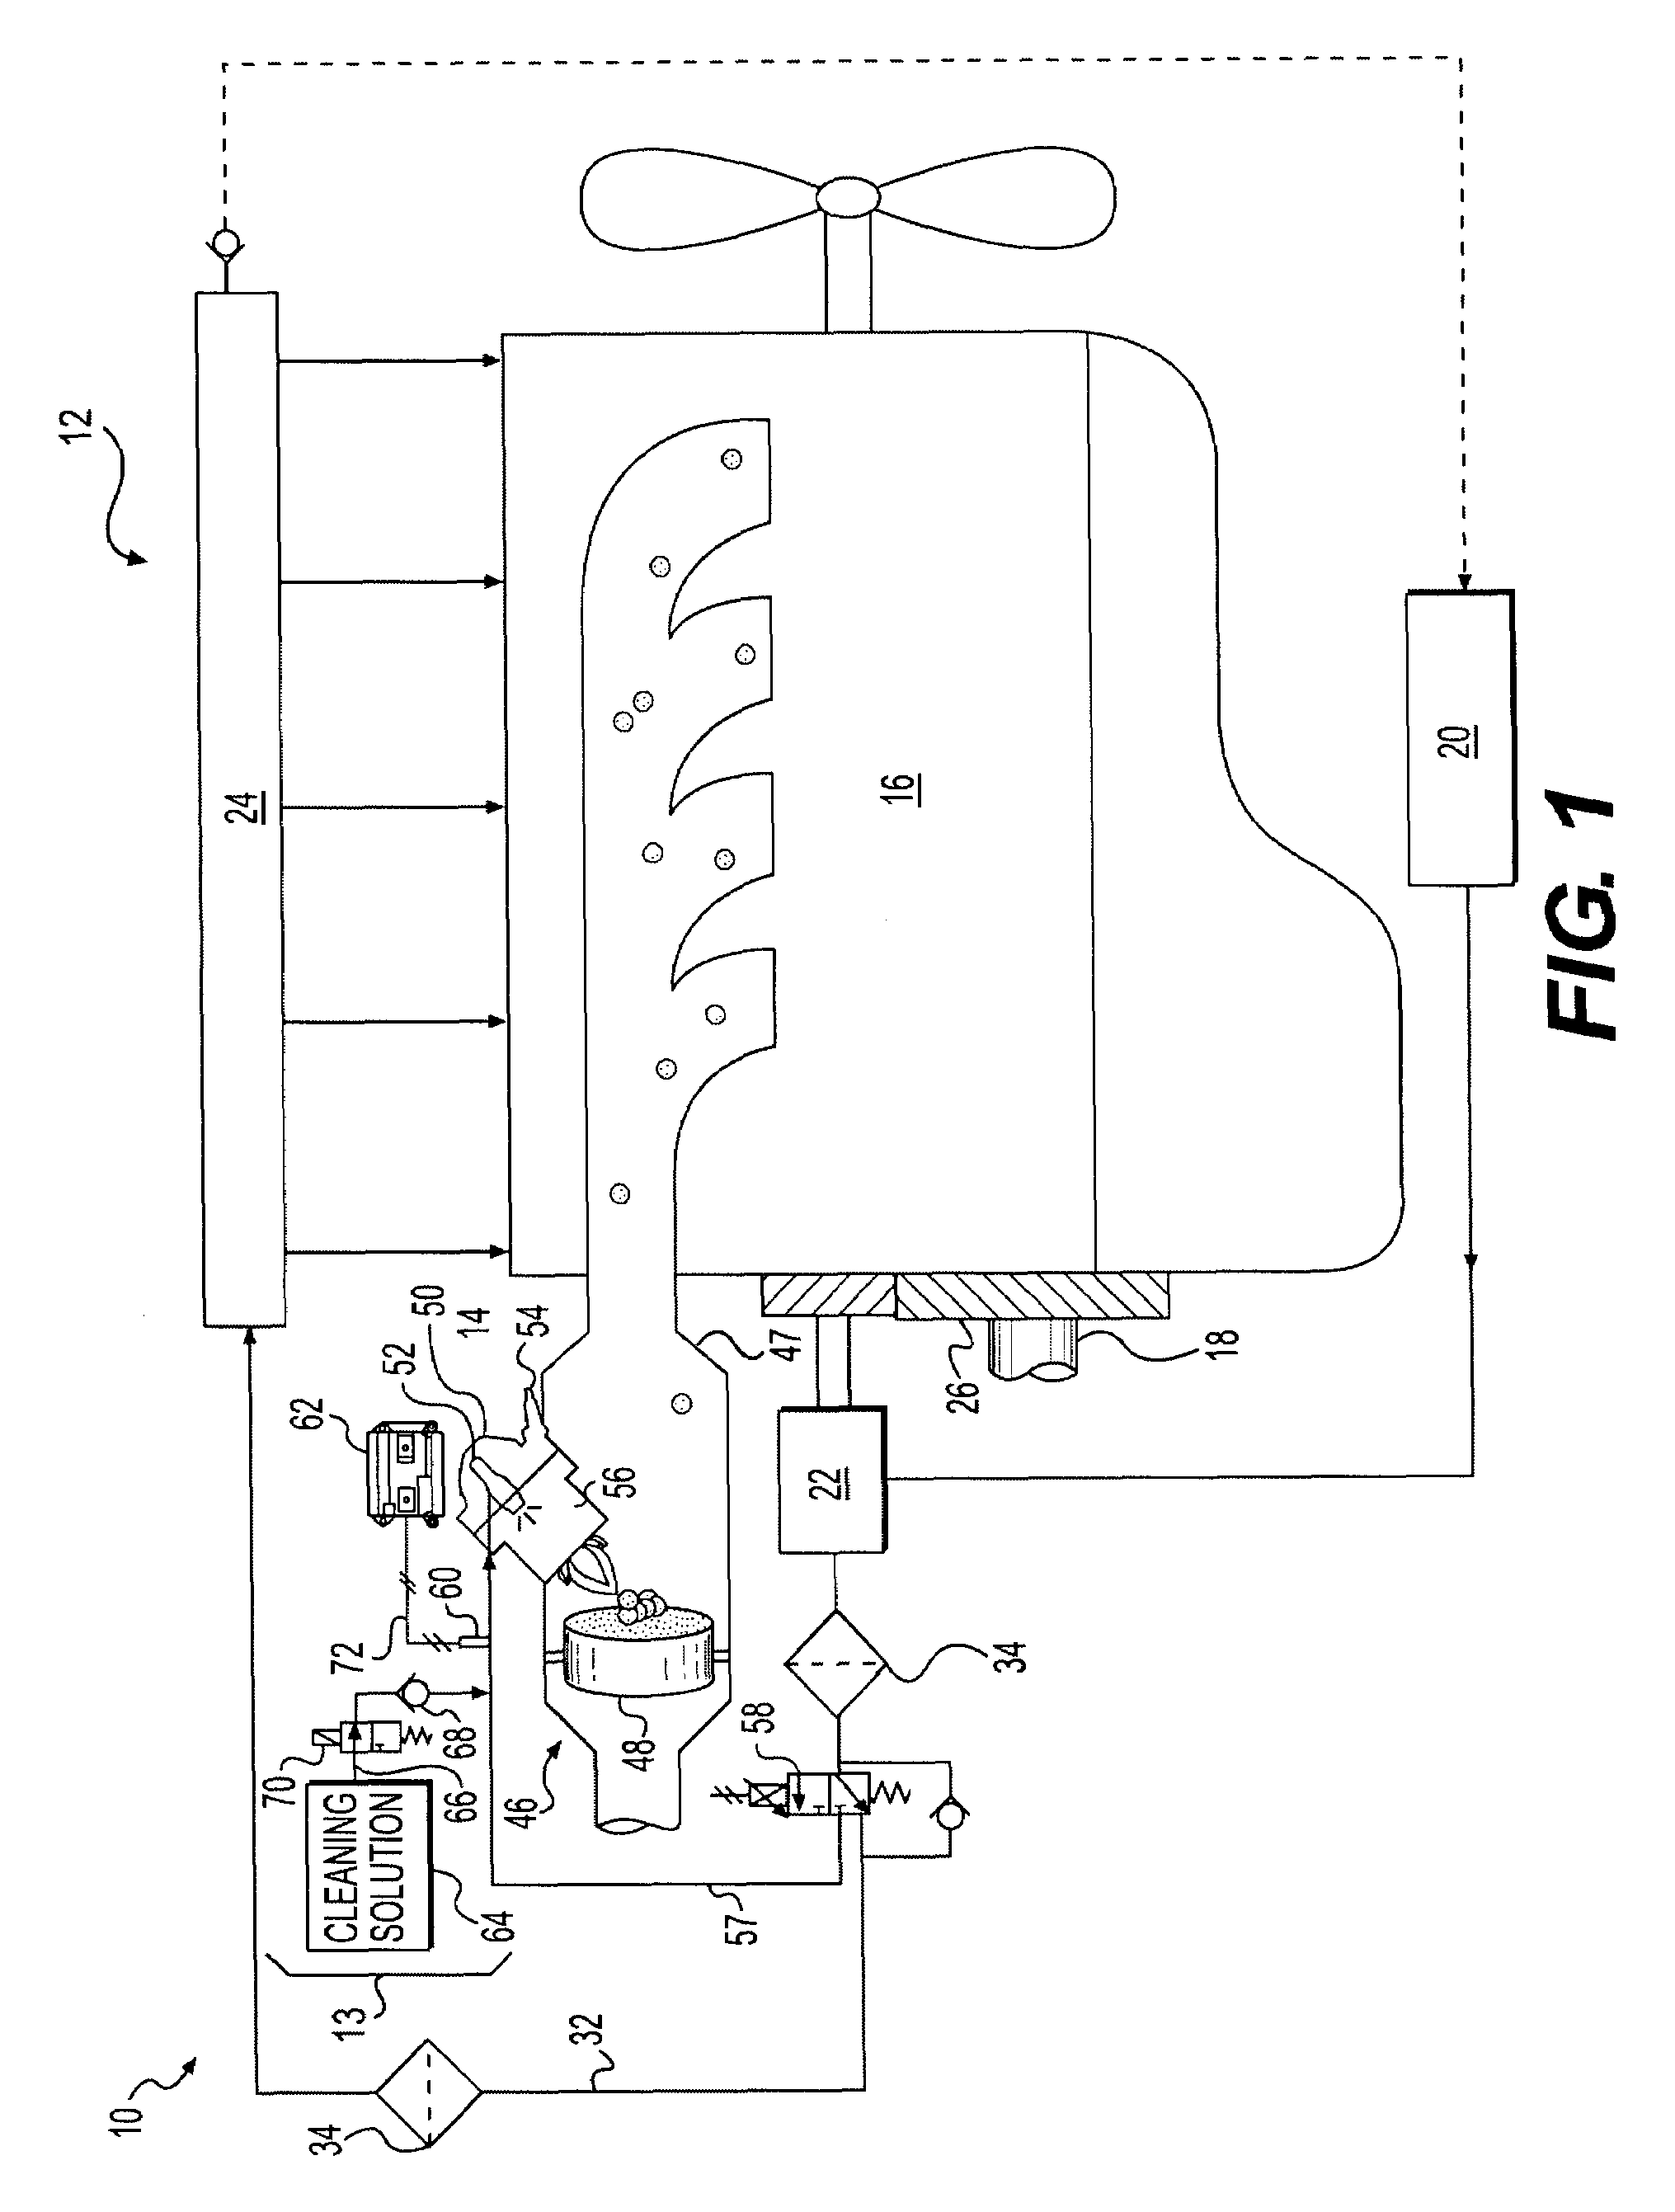 Injector cleaning system based on pressure decay